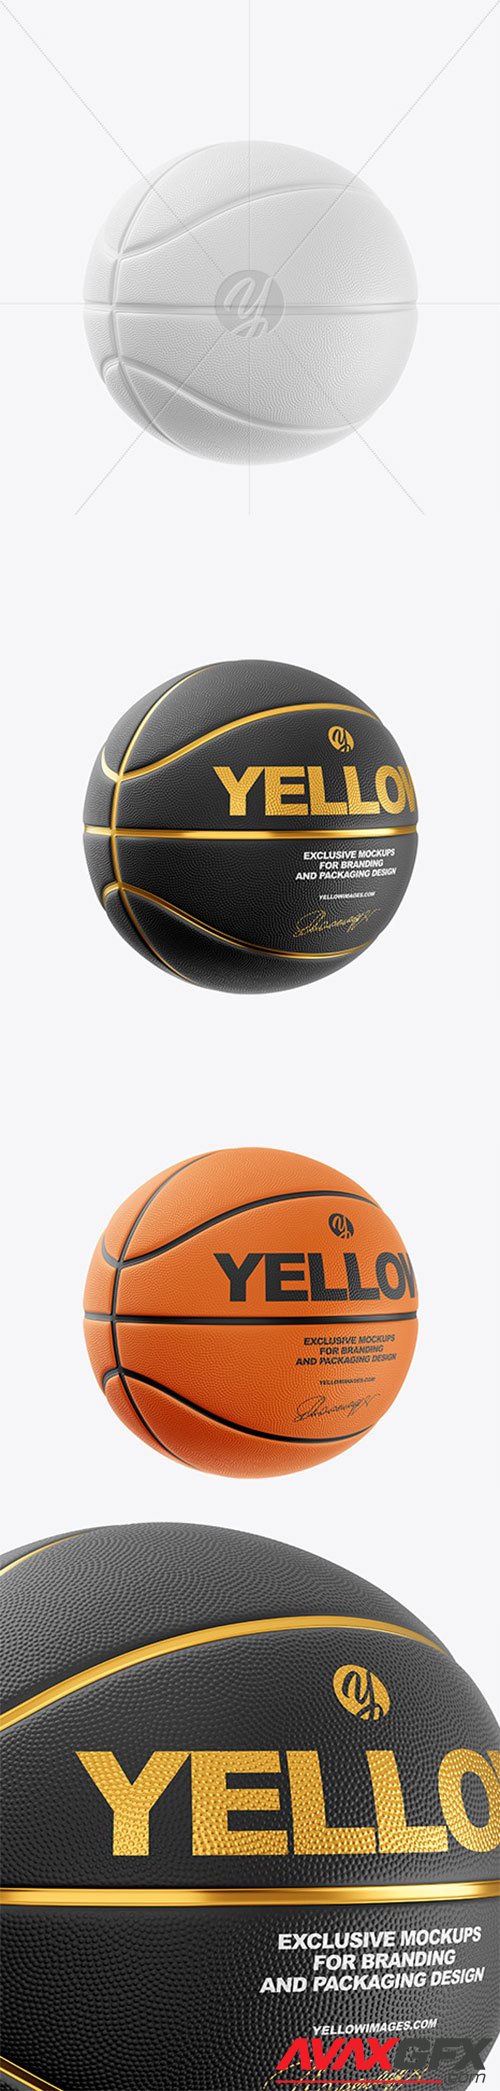 Download Basketball Ball Mockup 61200 Avaxgfx All Downloads That You Need In One Place Graphic From Nitroflare Rapidgator